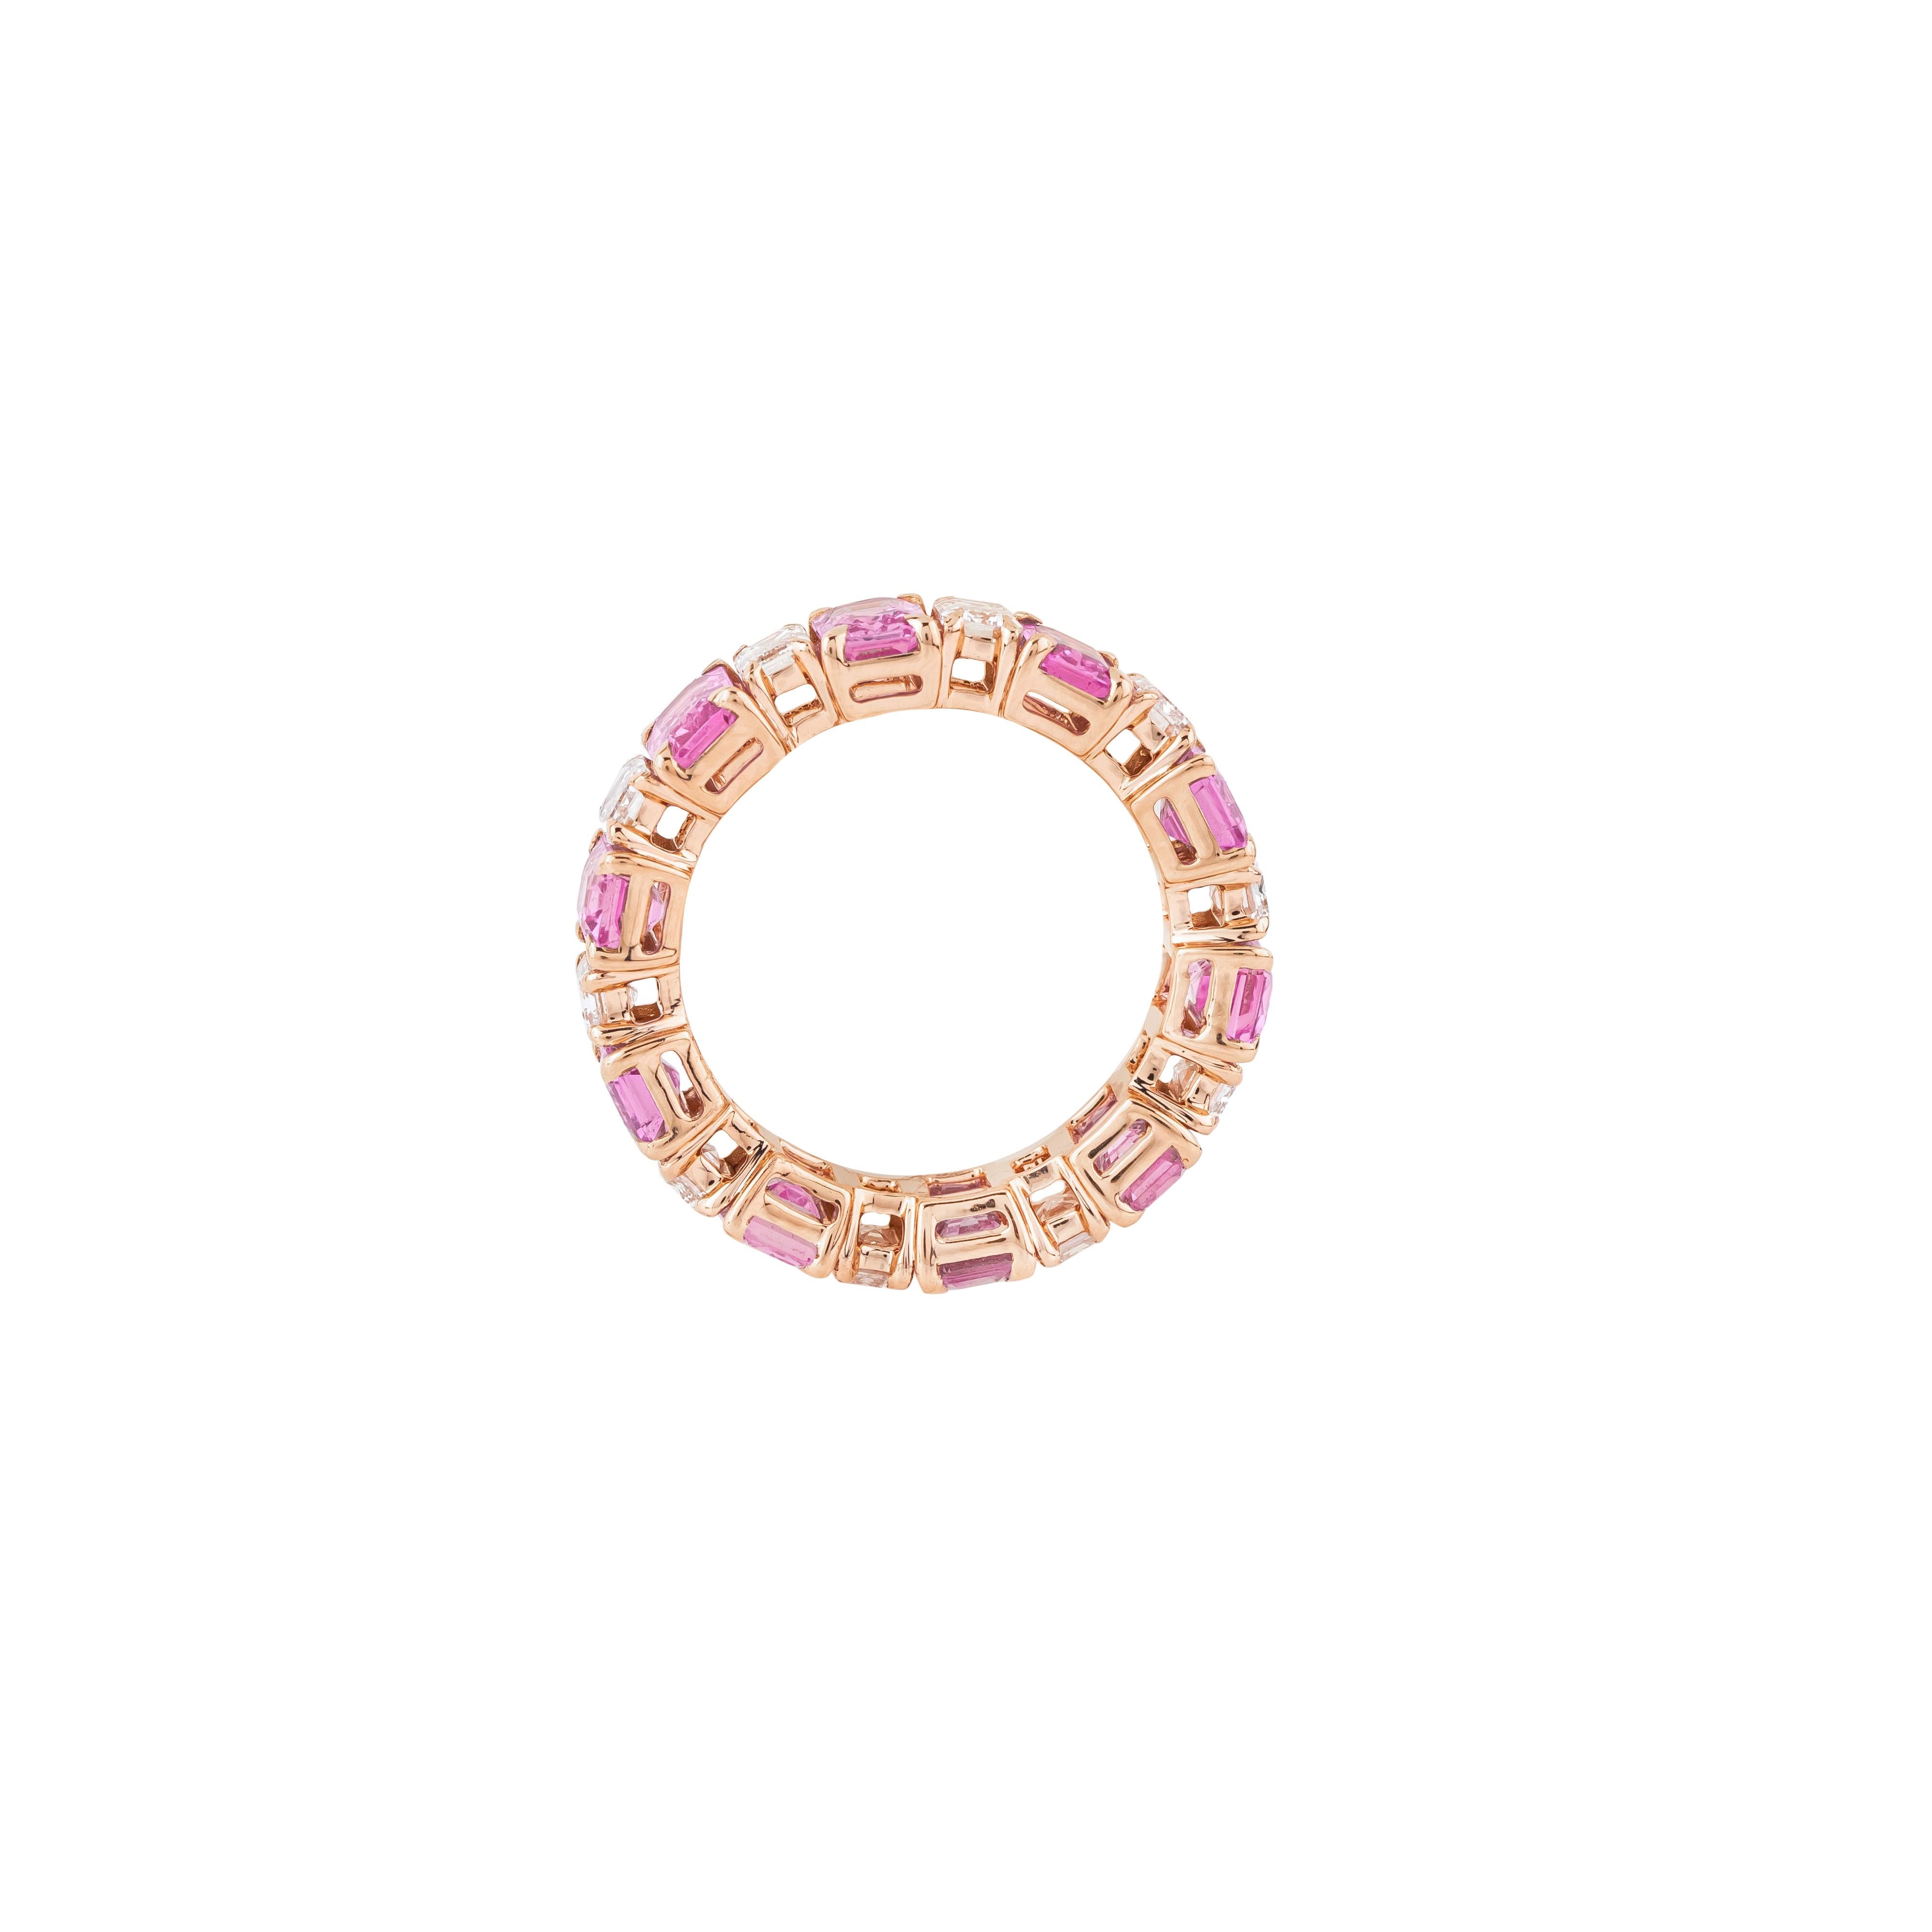 Immerse yourself in the exquisite allure of our 18 Karat Gold 8.81 Carat Diamond and Pink Sapphire Eternity Band Ring – a stunning testament to eternal love and timeless beauty. Each ring is meticulously crafted and curated to encapsulate the